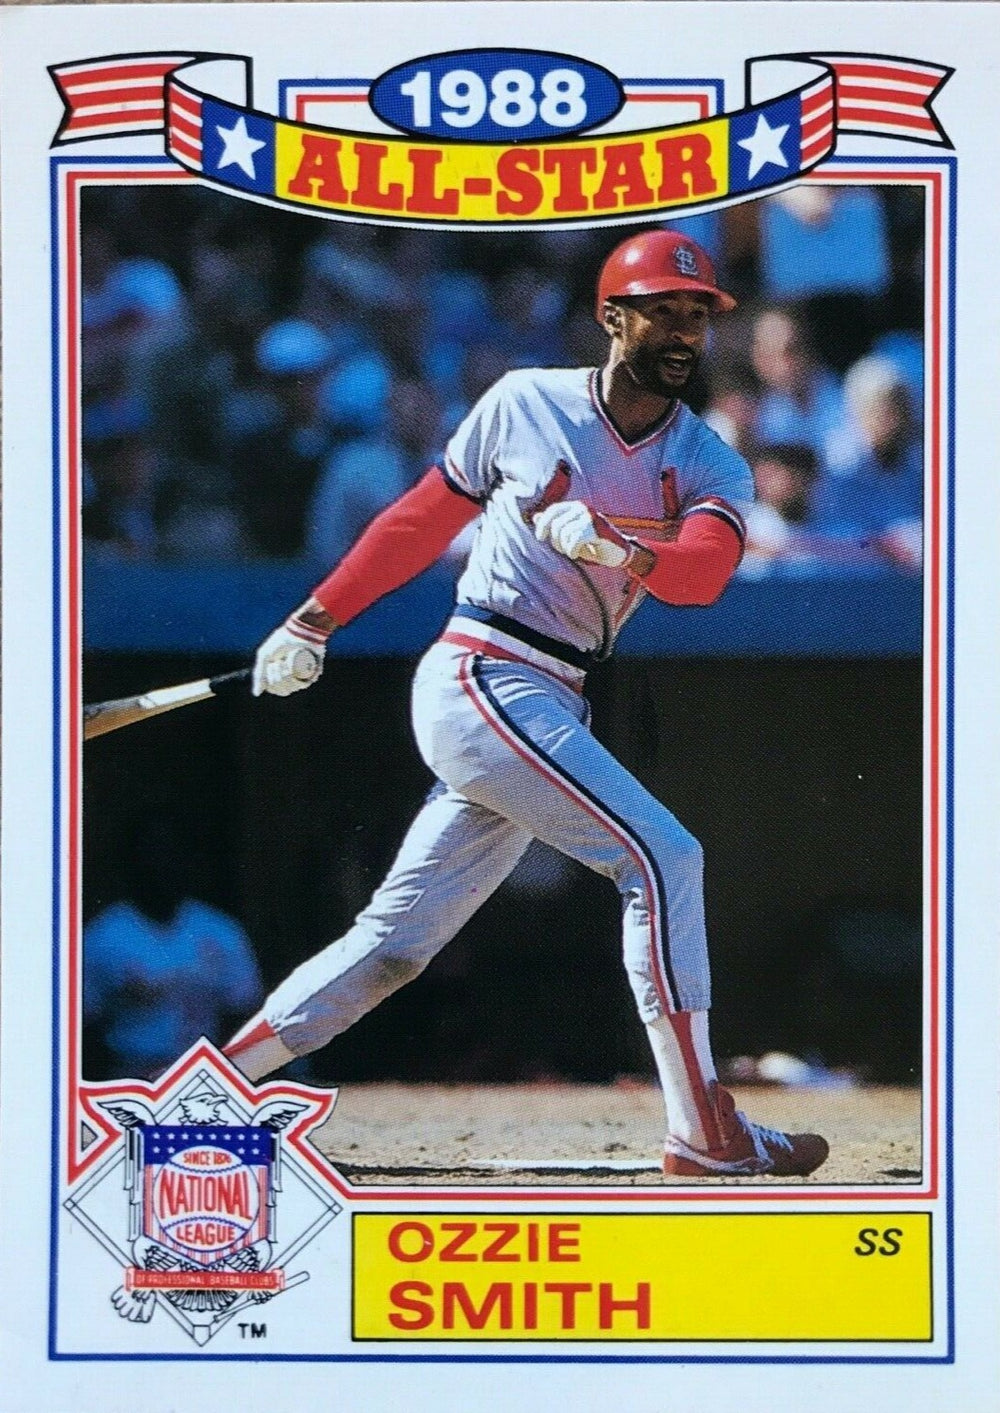 Ozzie Smith – Ryan's Card Collection